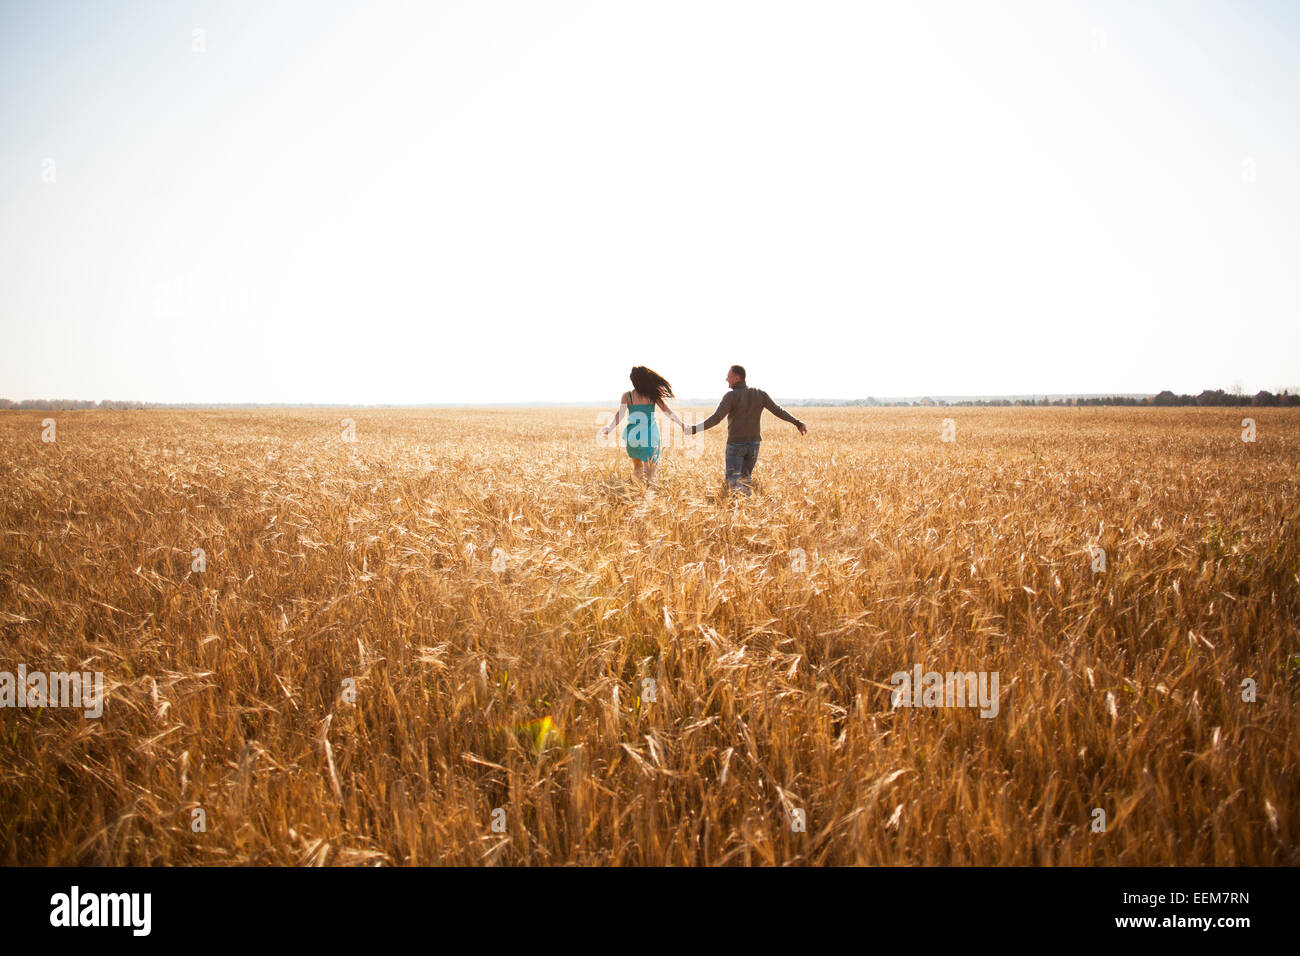 Caucasian couple running in rural field Banque D'Images